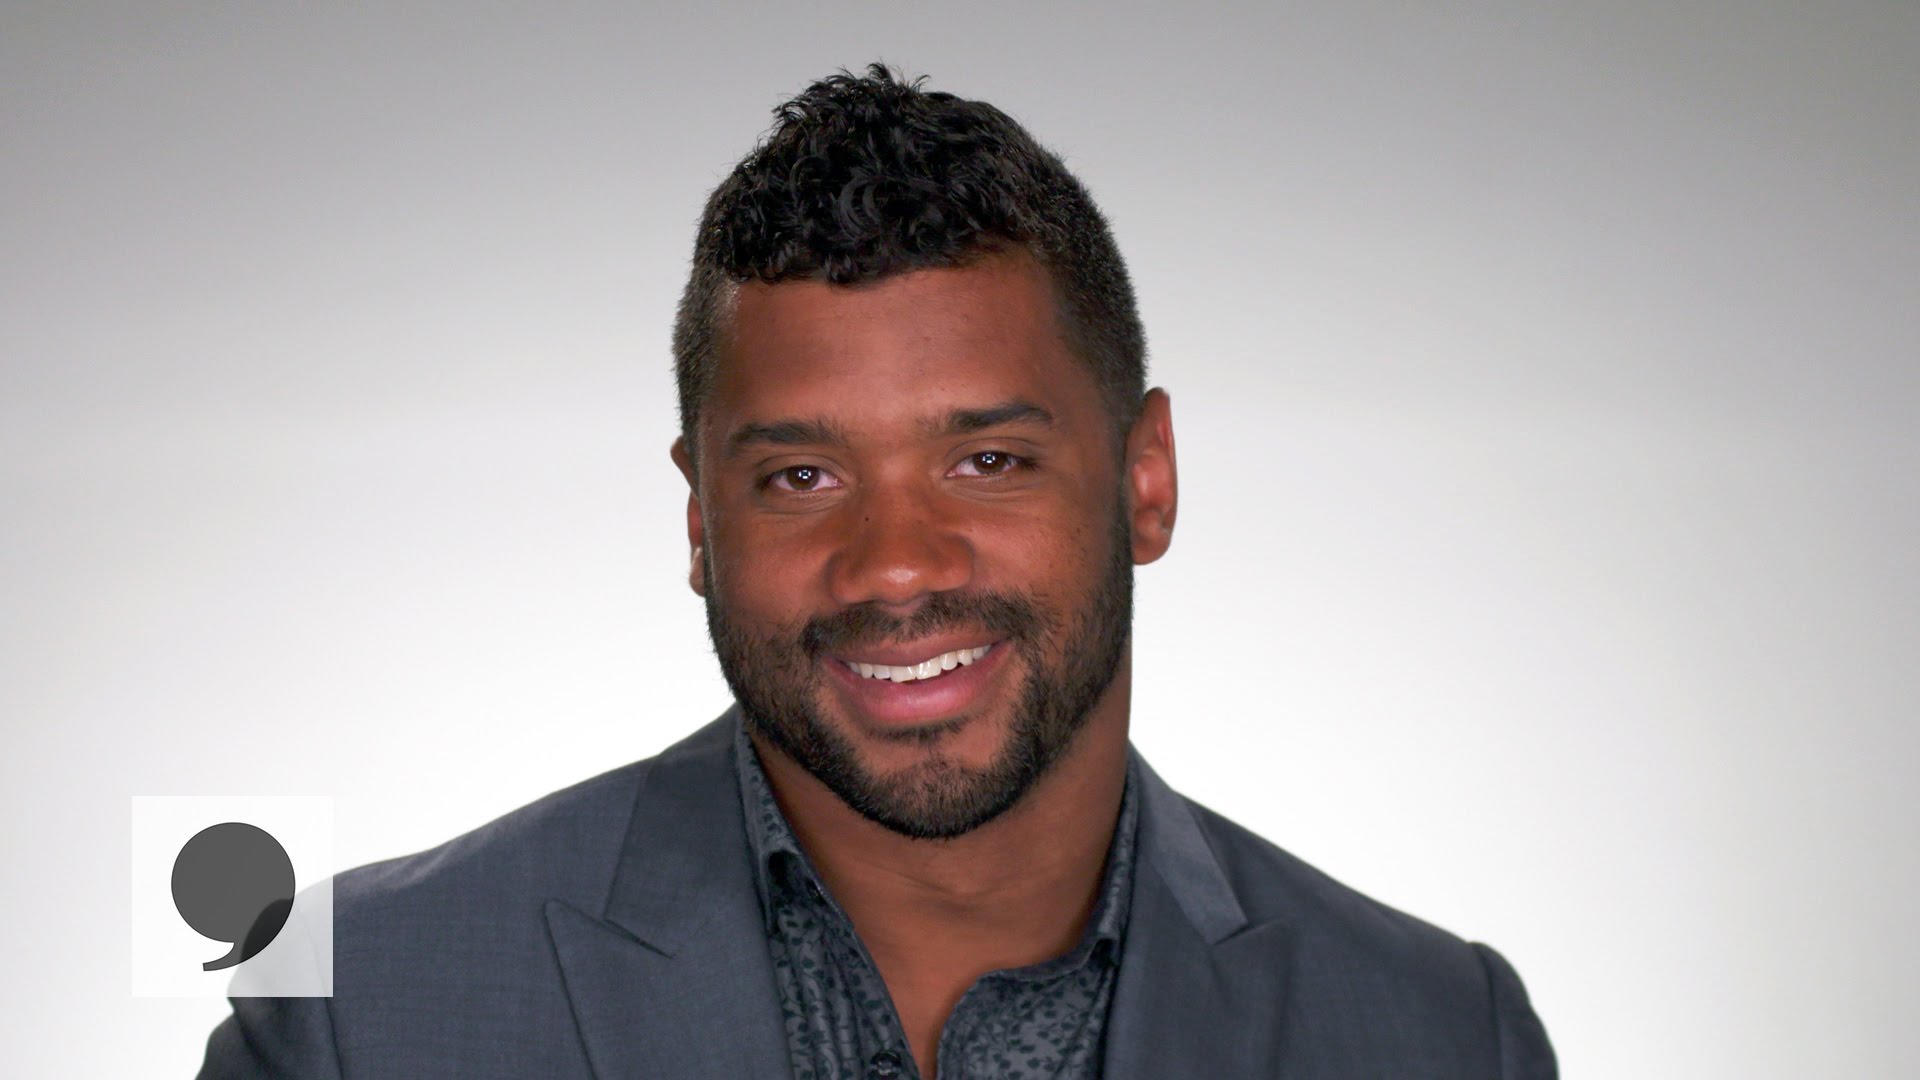 Russell Wilson shares his state of mind since the final play of Super Bowl XLIX